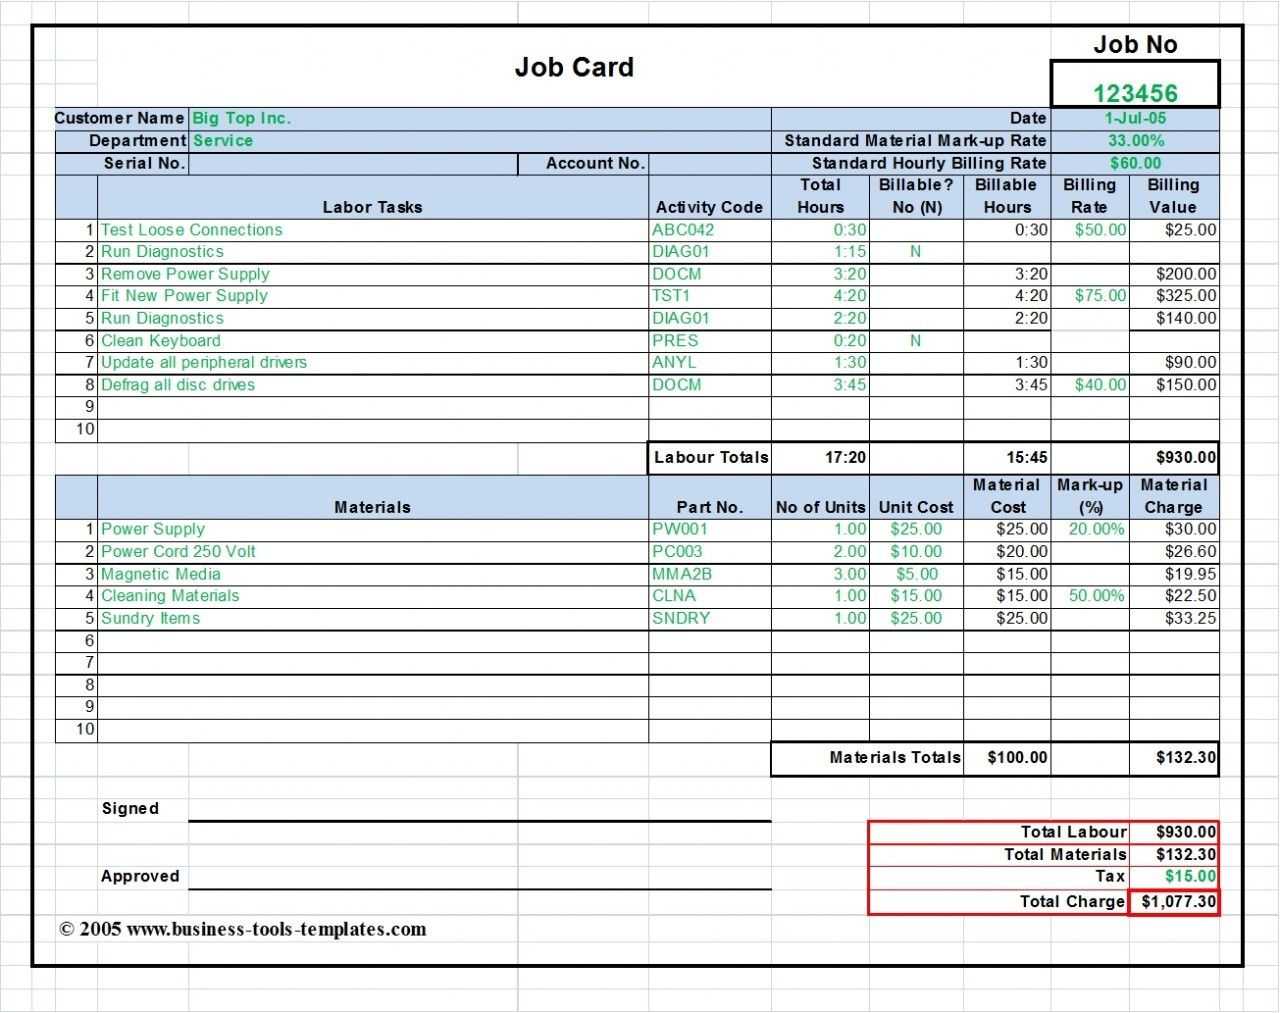 Workshop Job Card Template Excel, Labor & Material Cost Pertaining To Maintenance Job Card Template